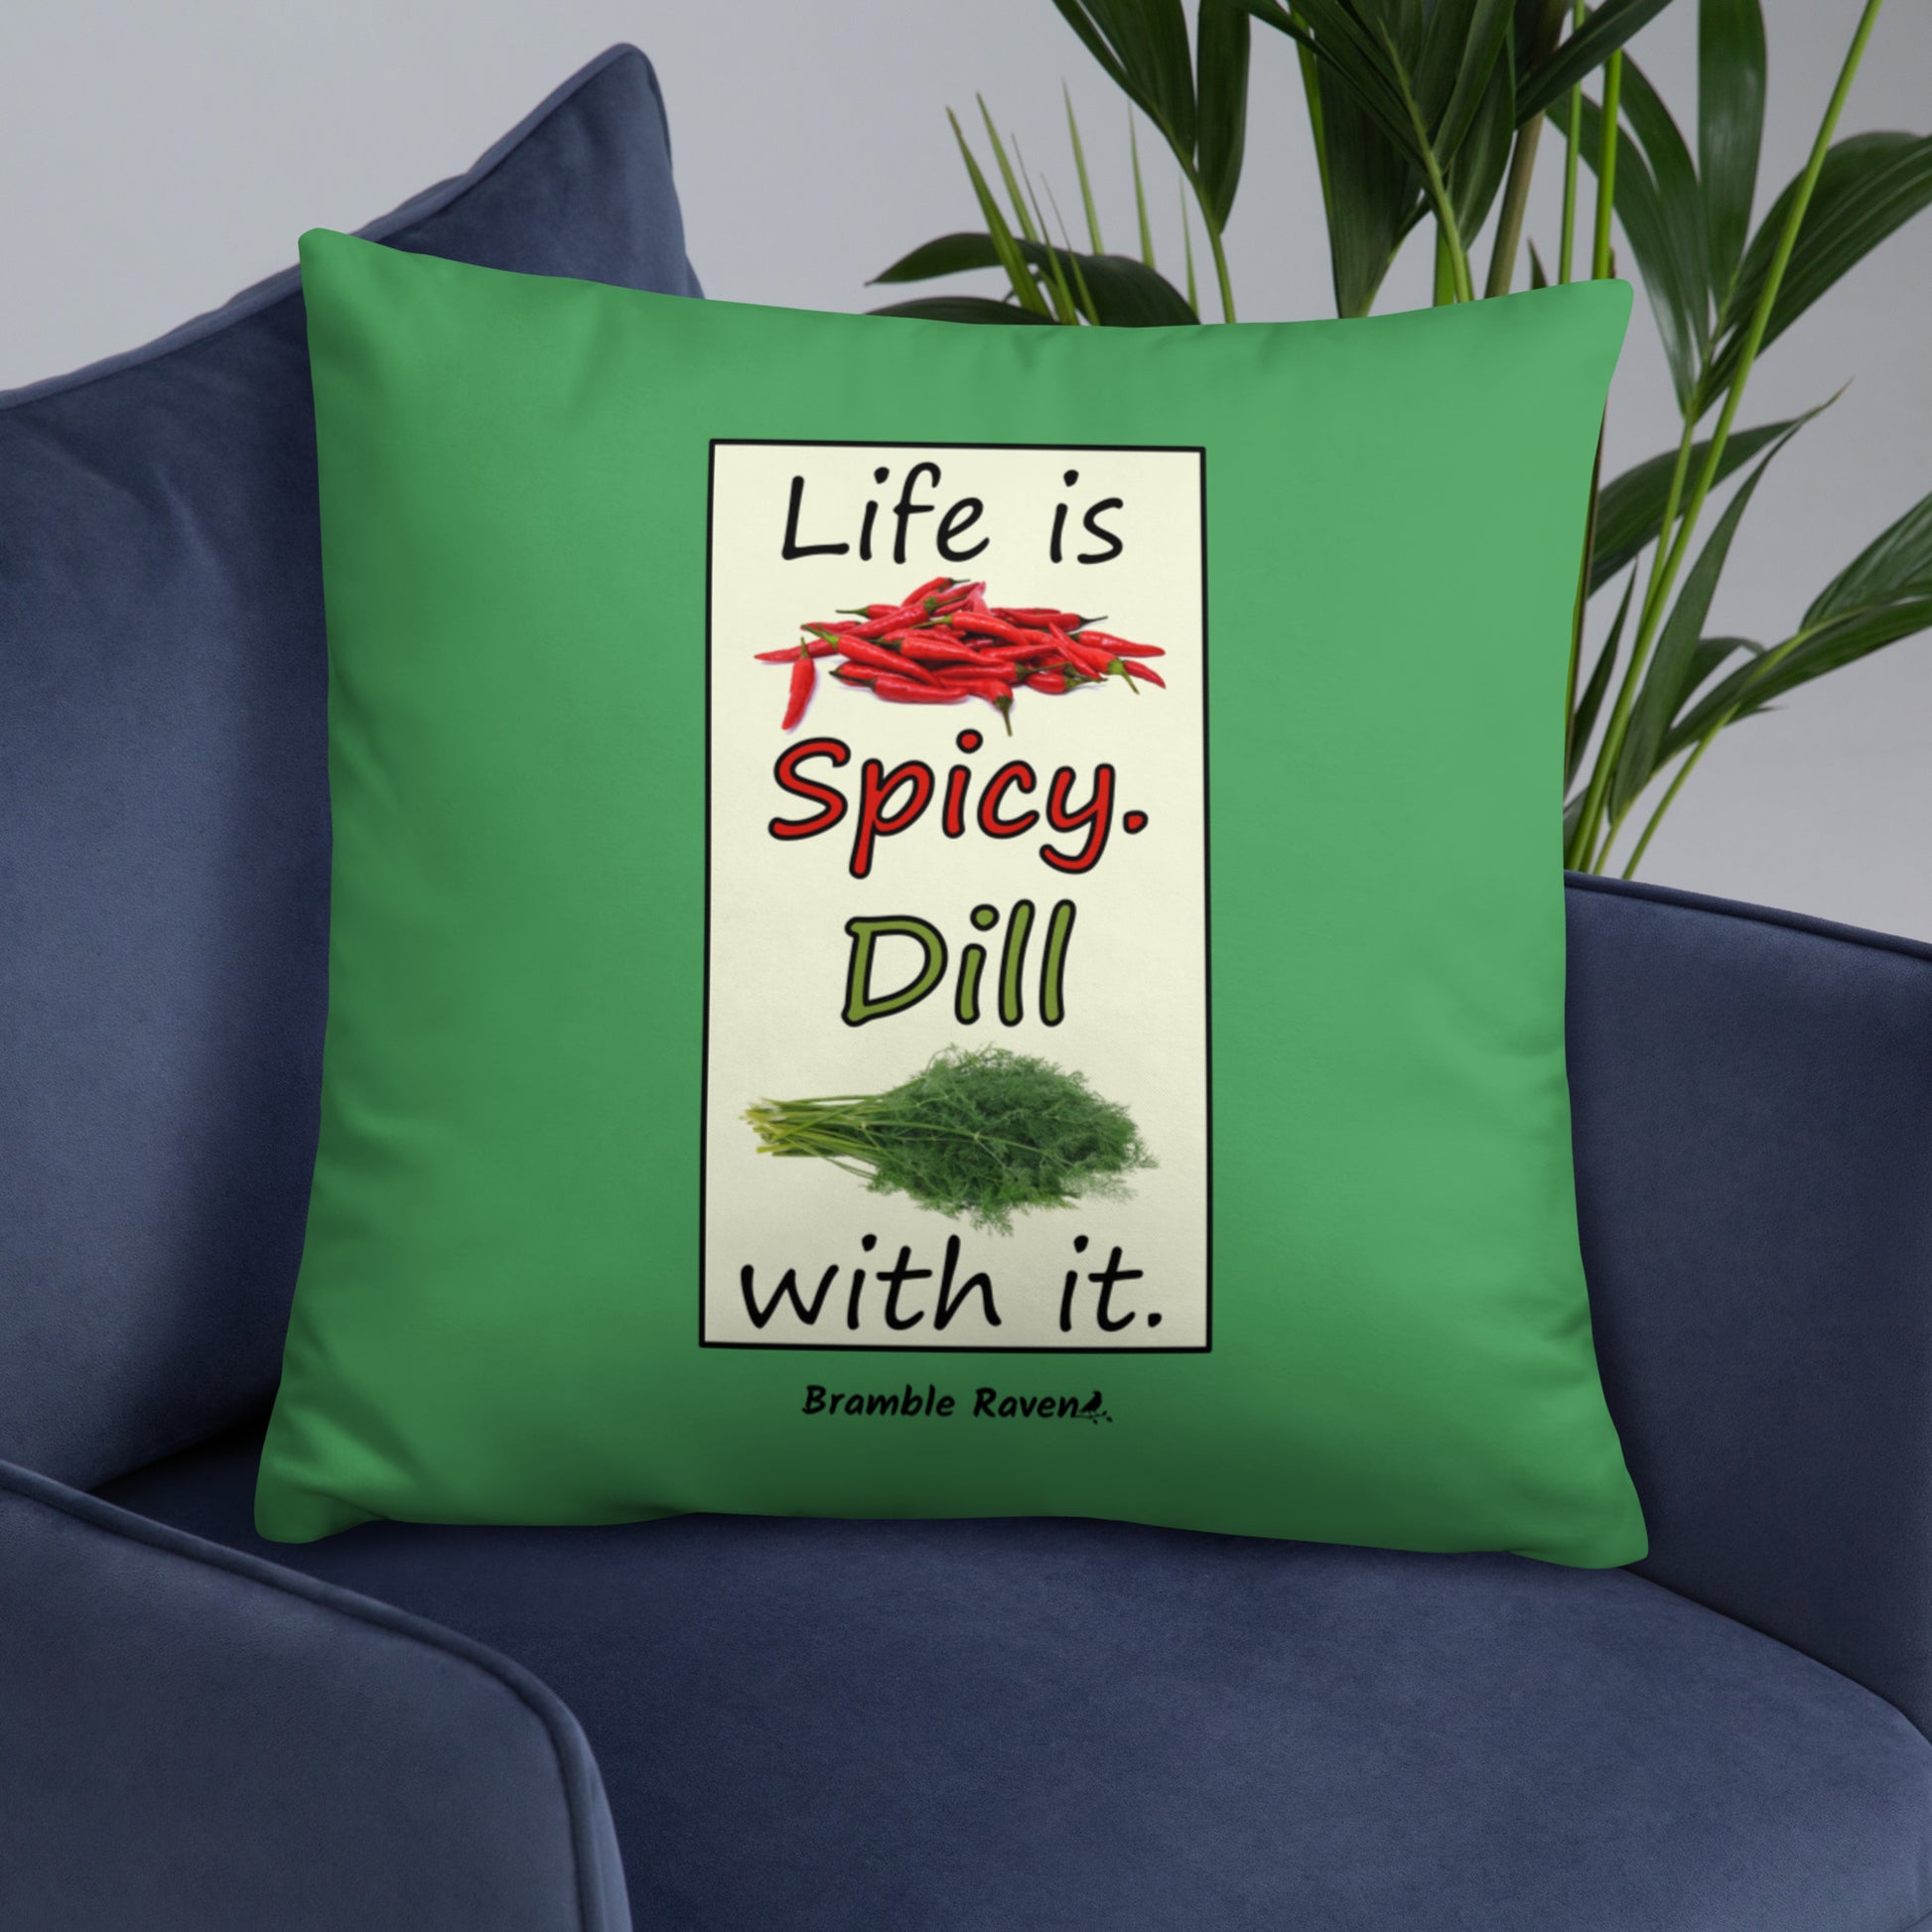 Life is spicy. Dill with it. Phrase with images of chili peppers and dill weed. Rectangular frame for saying on green background. 22 by 22 inch accent pillow. Double sided image. Shown on a blue couch.